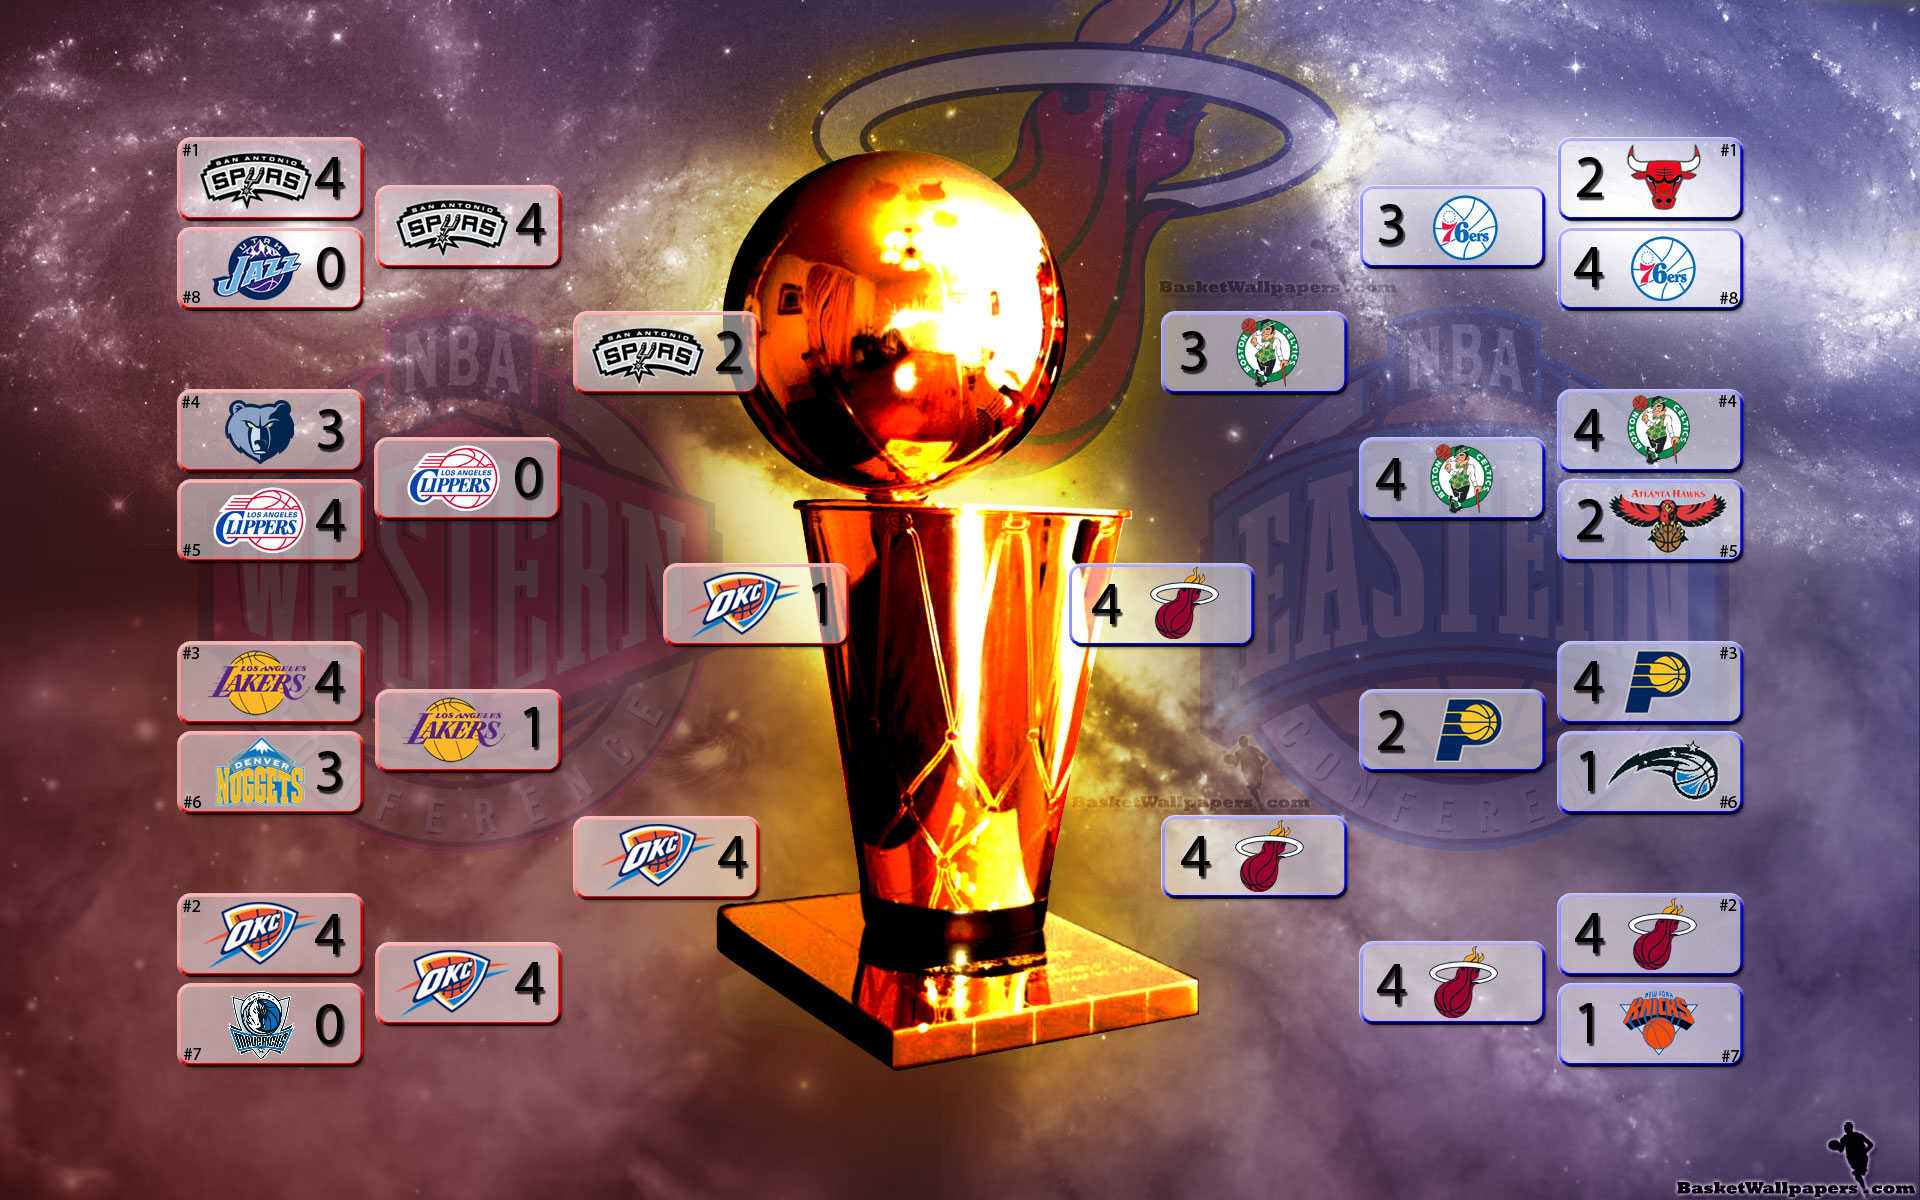 http://www.basketwallpapers.com/Images-11/NBA-Playoffs-2012-Bracket-Wallpaper-BasketWallpapers.com-.jpg